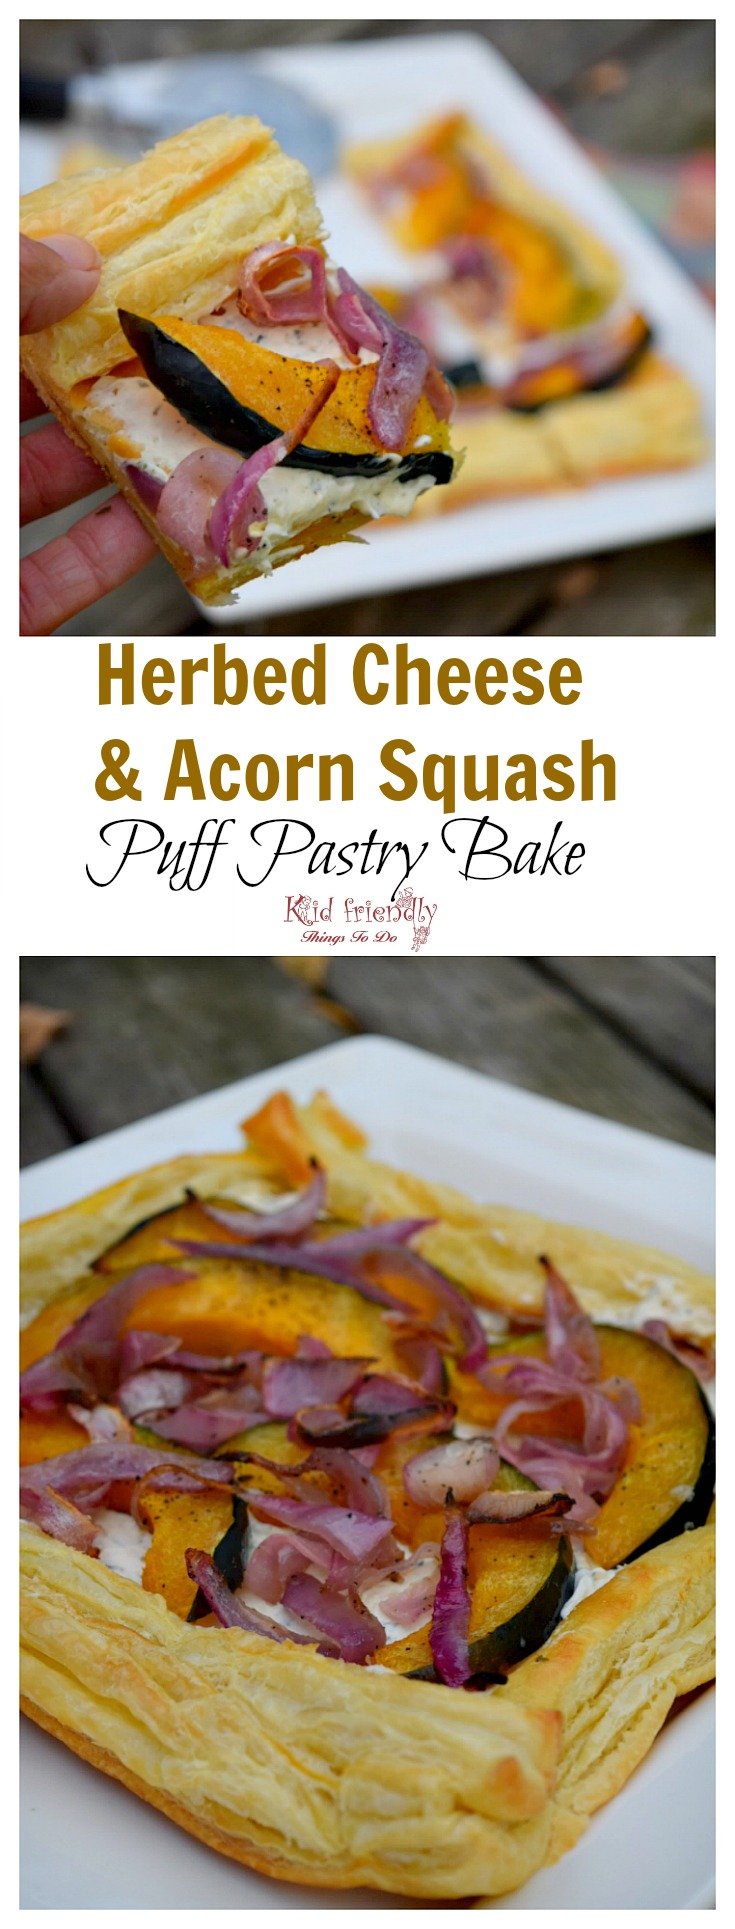 Herbed Cheese & Acorn Squash Puff Pastry Appetizer Recipe - perfect for Thanksgiving, Christmas, New Years and any other holiday or a family meal! www.kidfriendlythingstodo.com